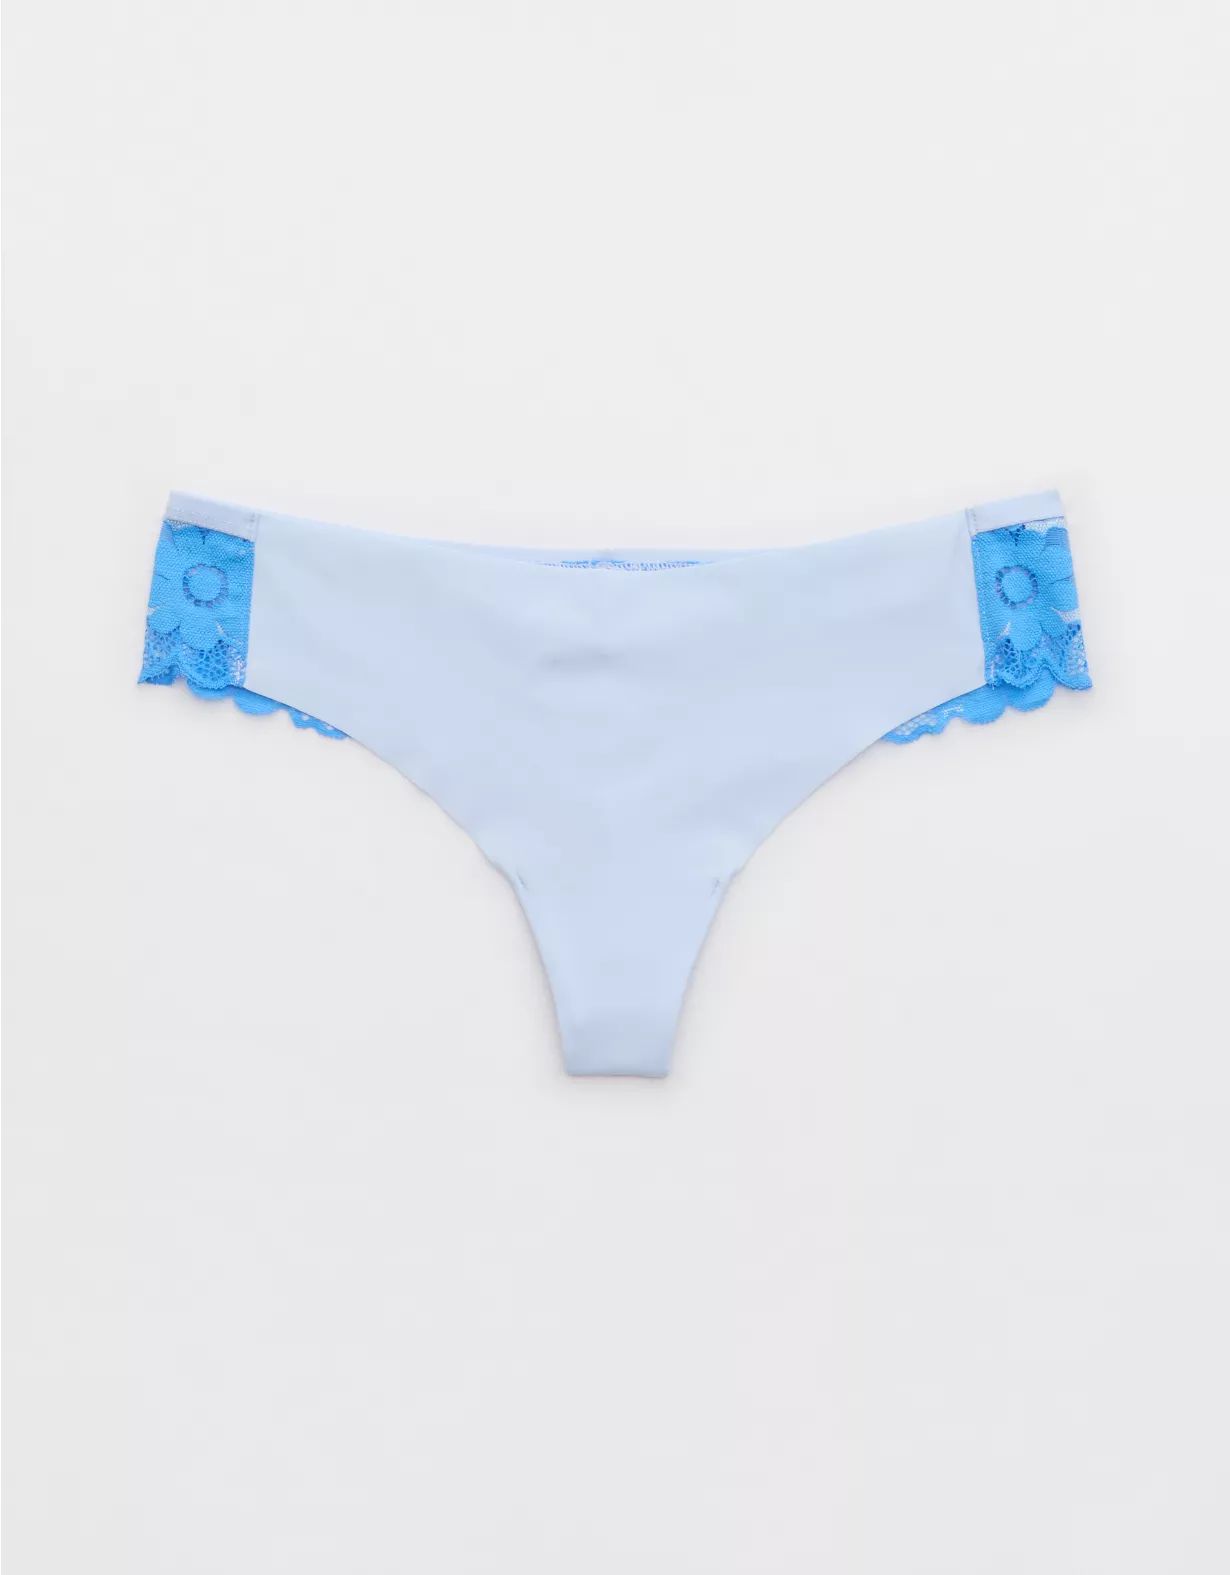 SMOOTHEZ No Show Lace Thong Underwear | Aerie